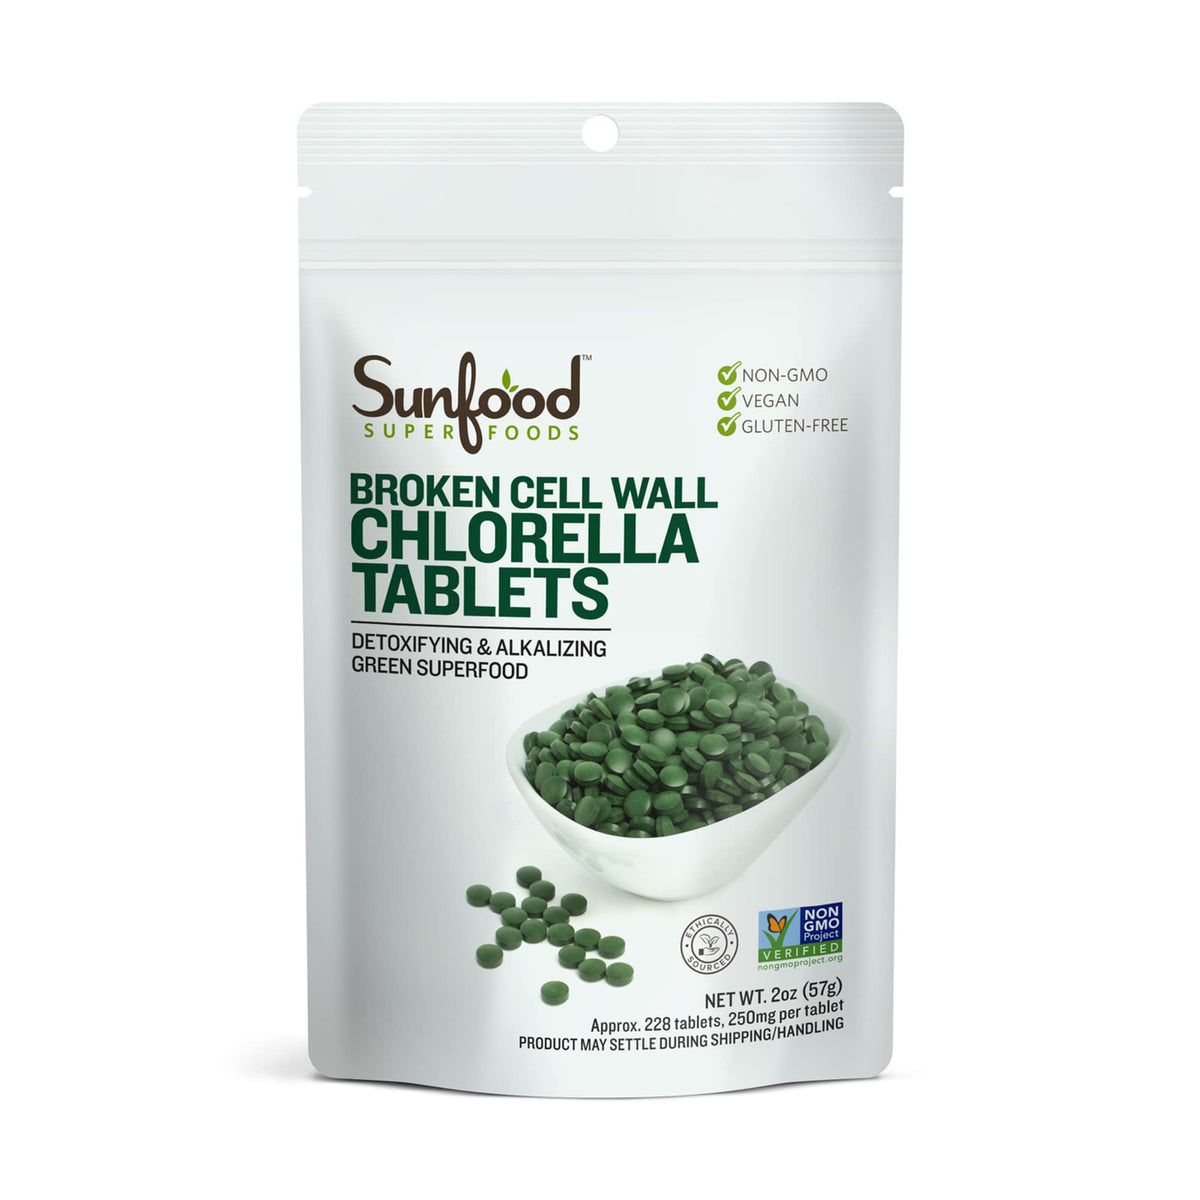 Sunfood - Broken Cell Wall Chlorella Tablets Detoxfying and Alkalizing Green Superfood Vegan 2 oz.